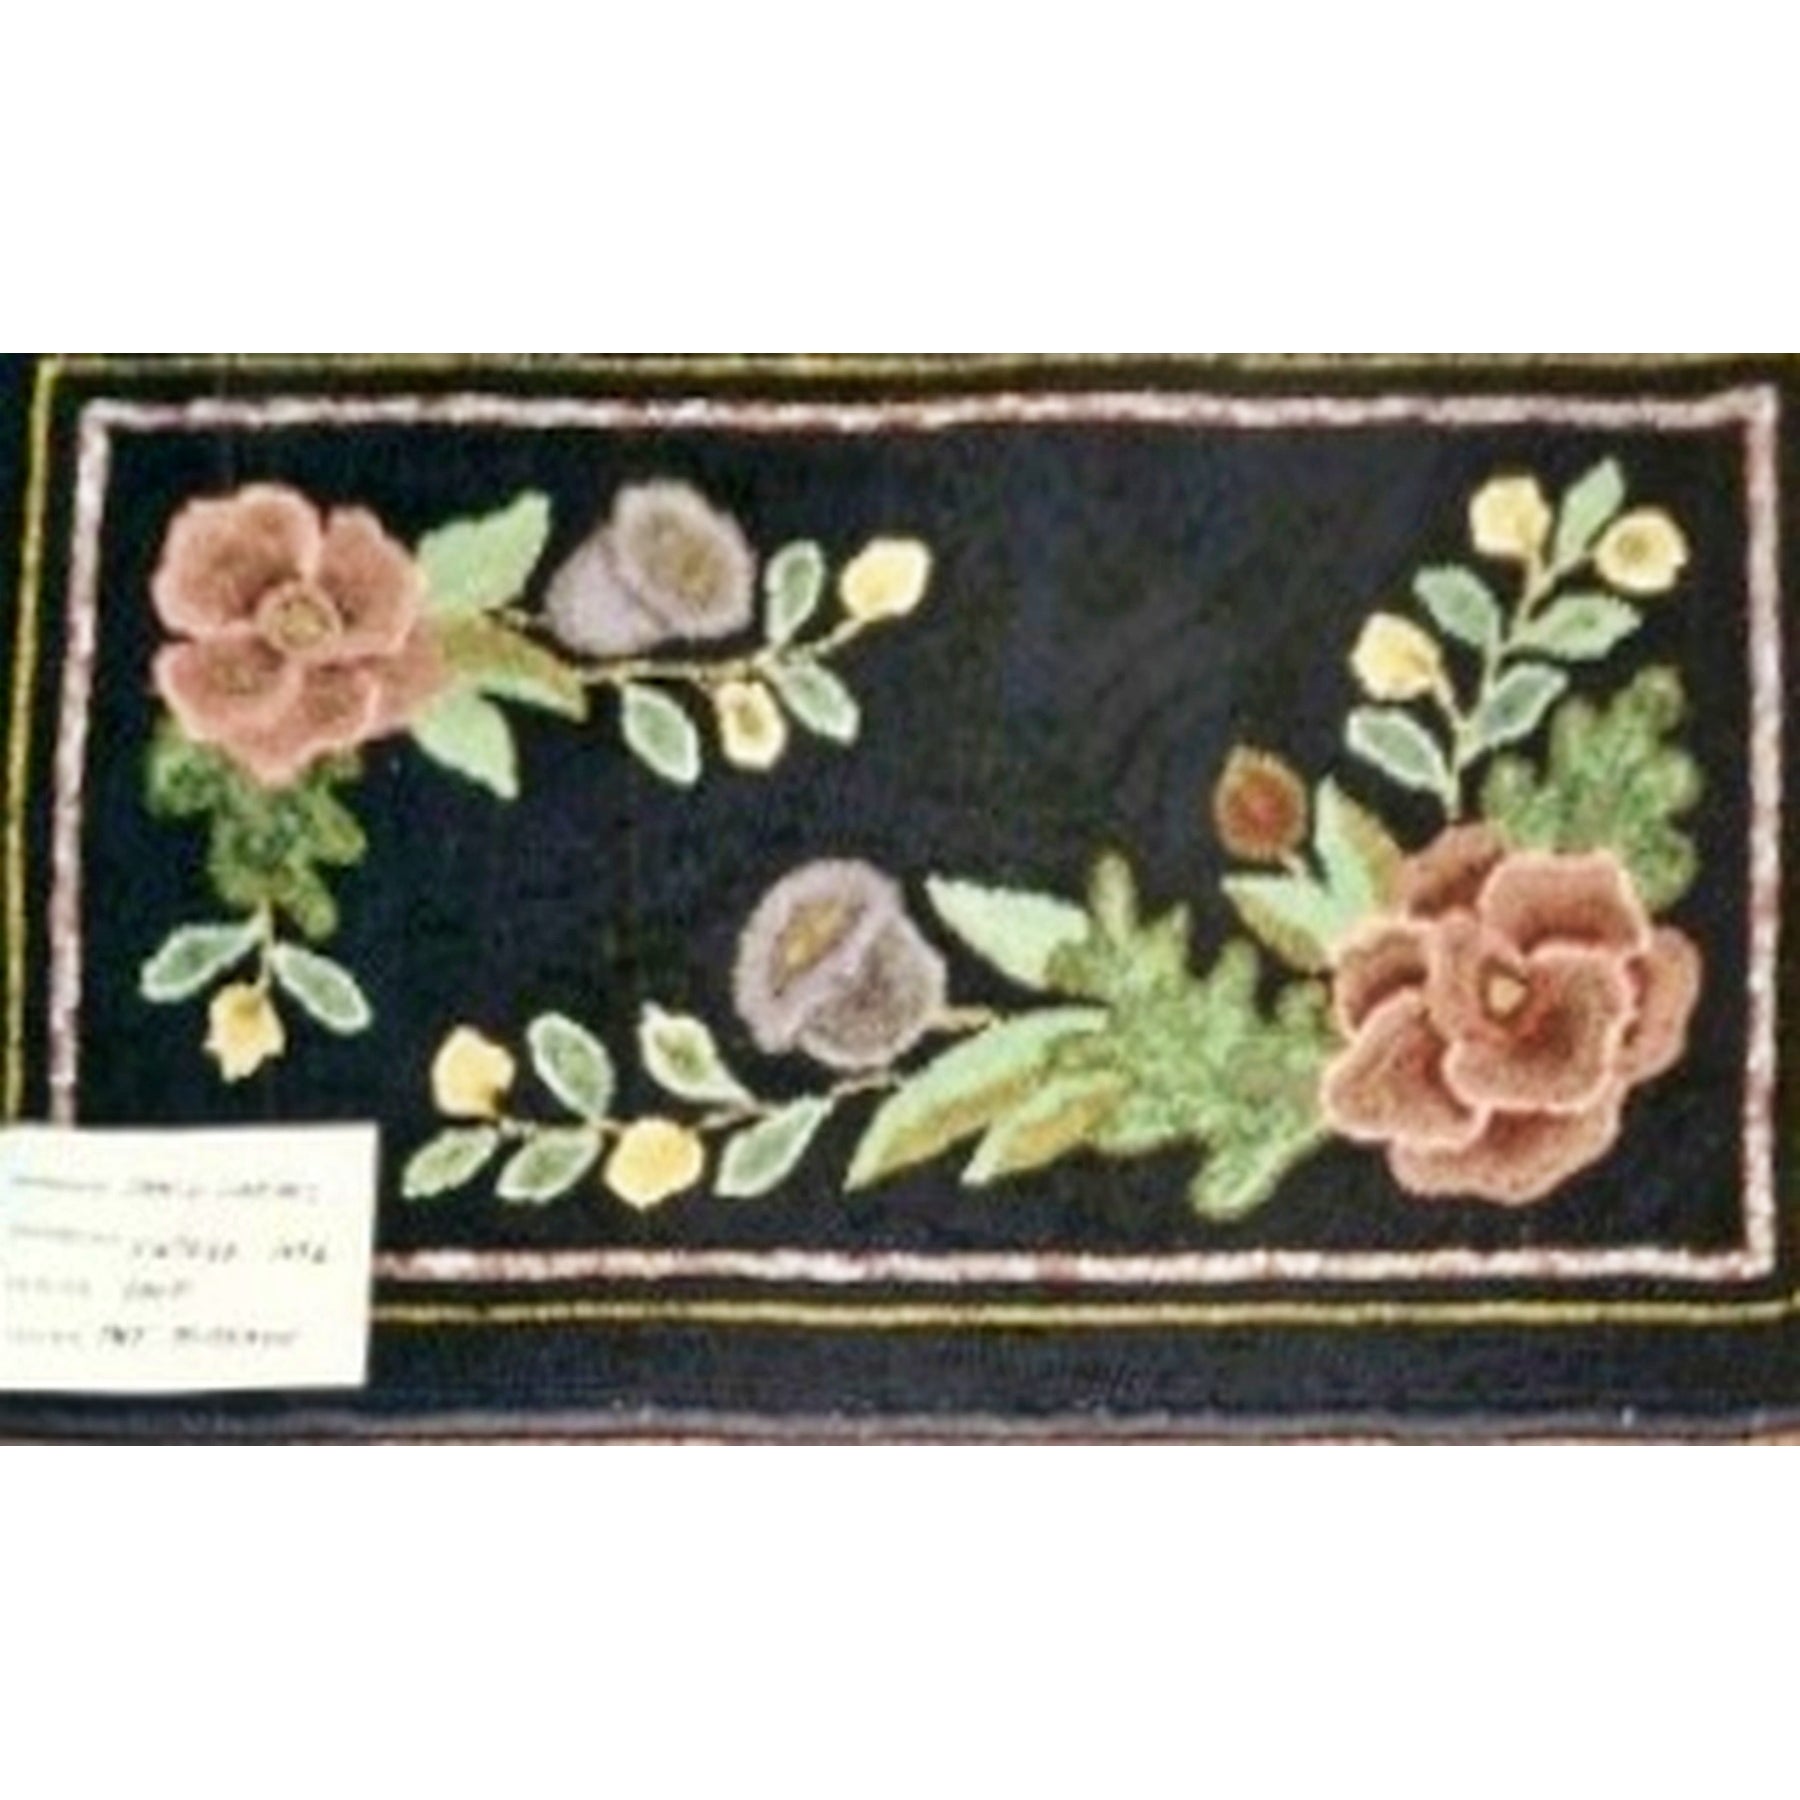 Vintage, rug hooked by Darcy Cardas